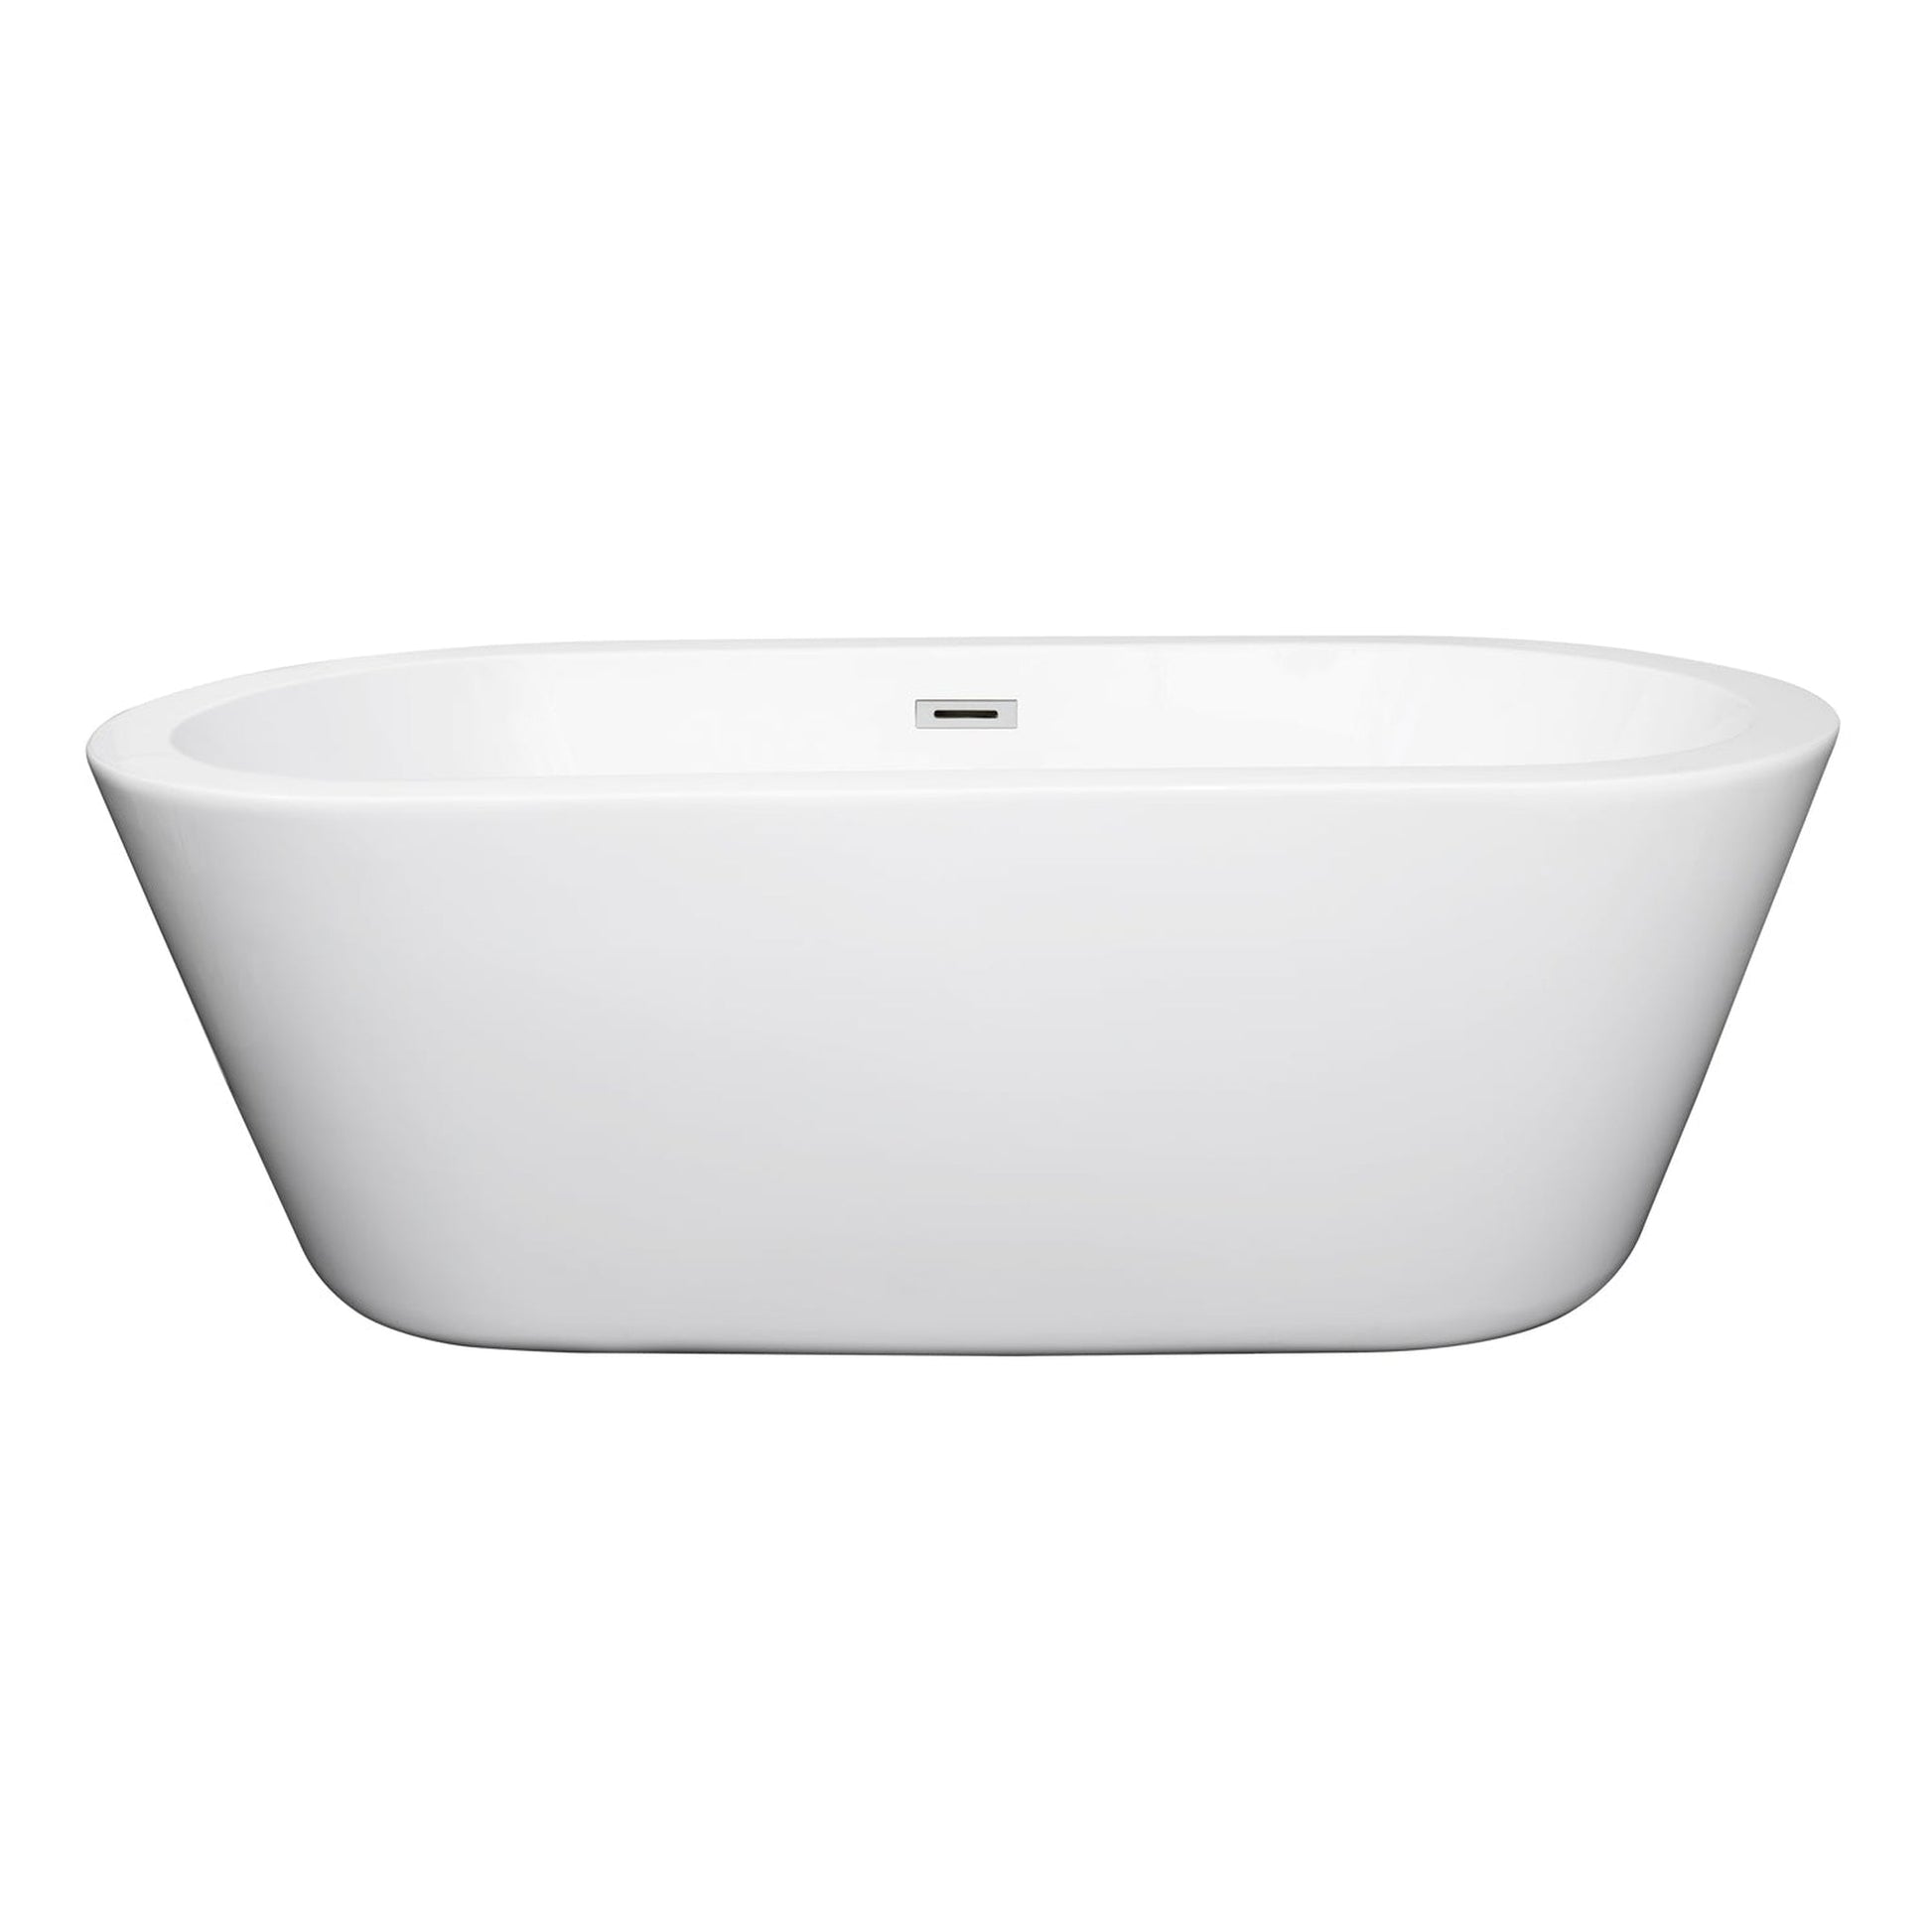 Wyndham Collection Mermaid 67" Freestanding Bathtub in White With Polished Chrome Drain and Overflow Trim